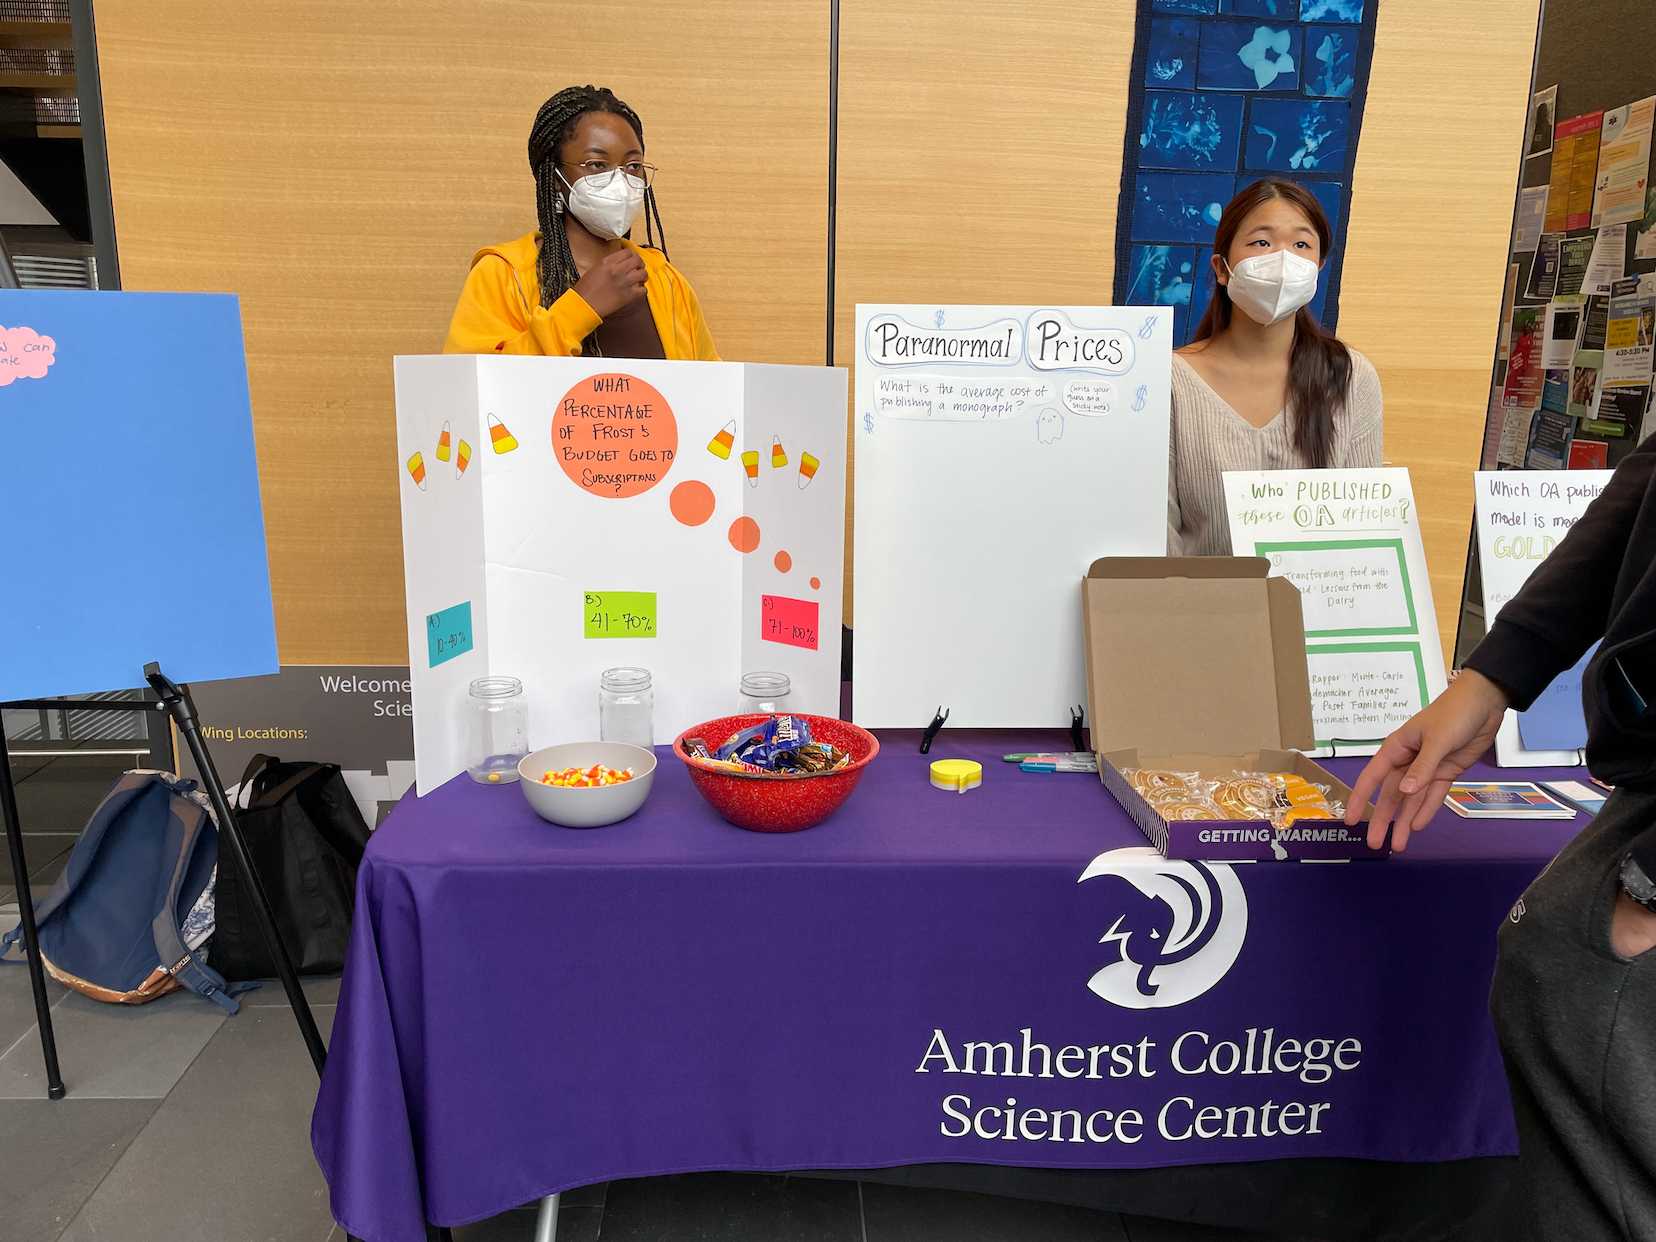 Candy and posters decorated with lettering and image cutouts sit on a table with a purple tablecloth and the words Amherst College Science Center on it. A Black woman and an Asian woman wearing masks stand people stand behind it.